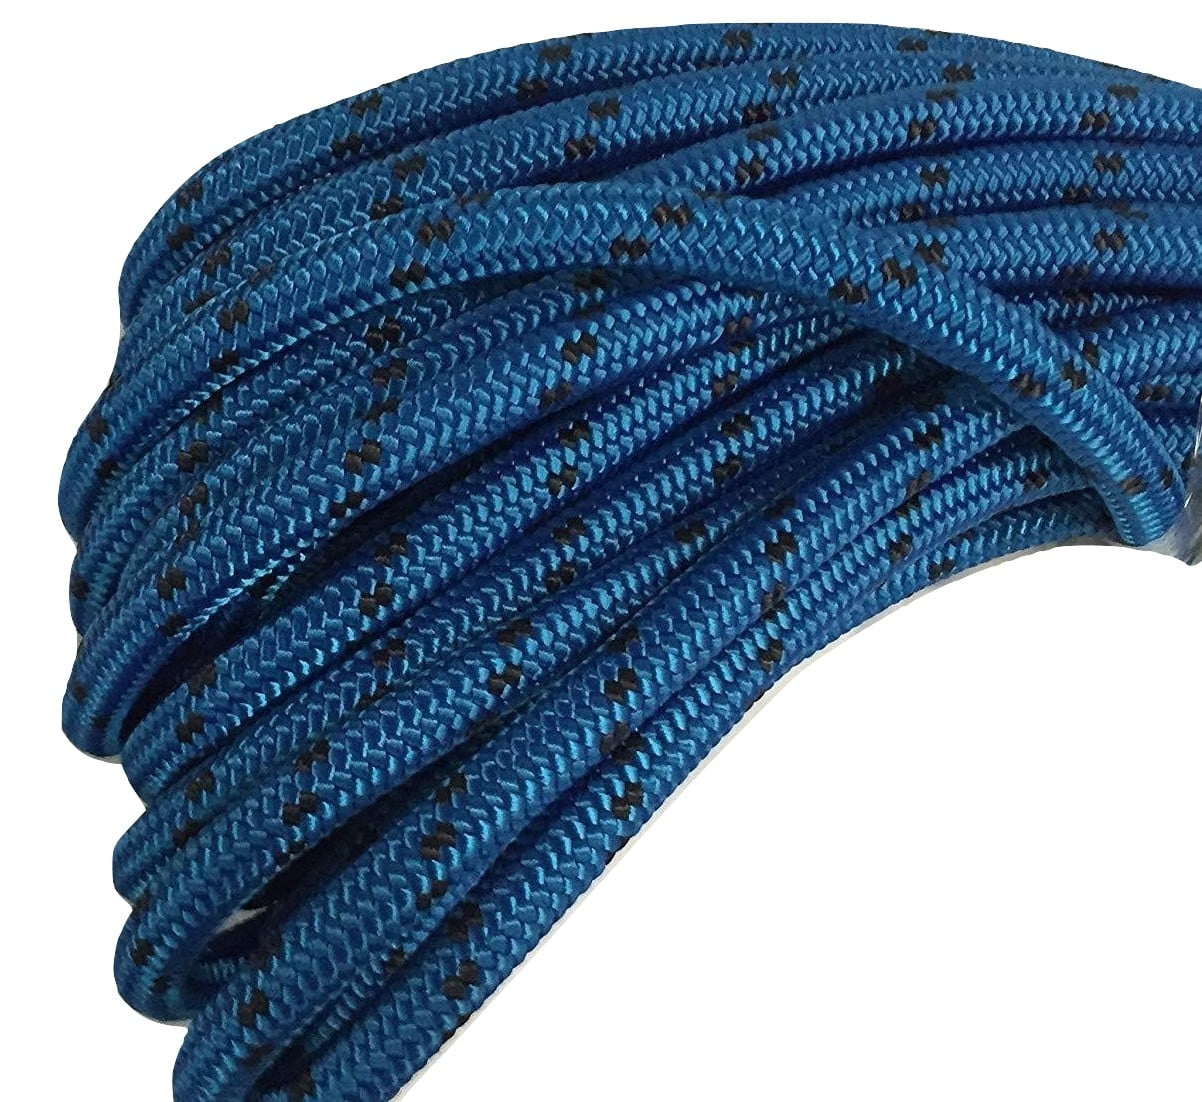 USA NEW 100FT Double Braid Polyester Rope 3/8 4800Lbs BREAKING STRENGTH US 